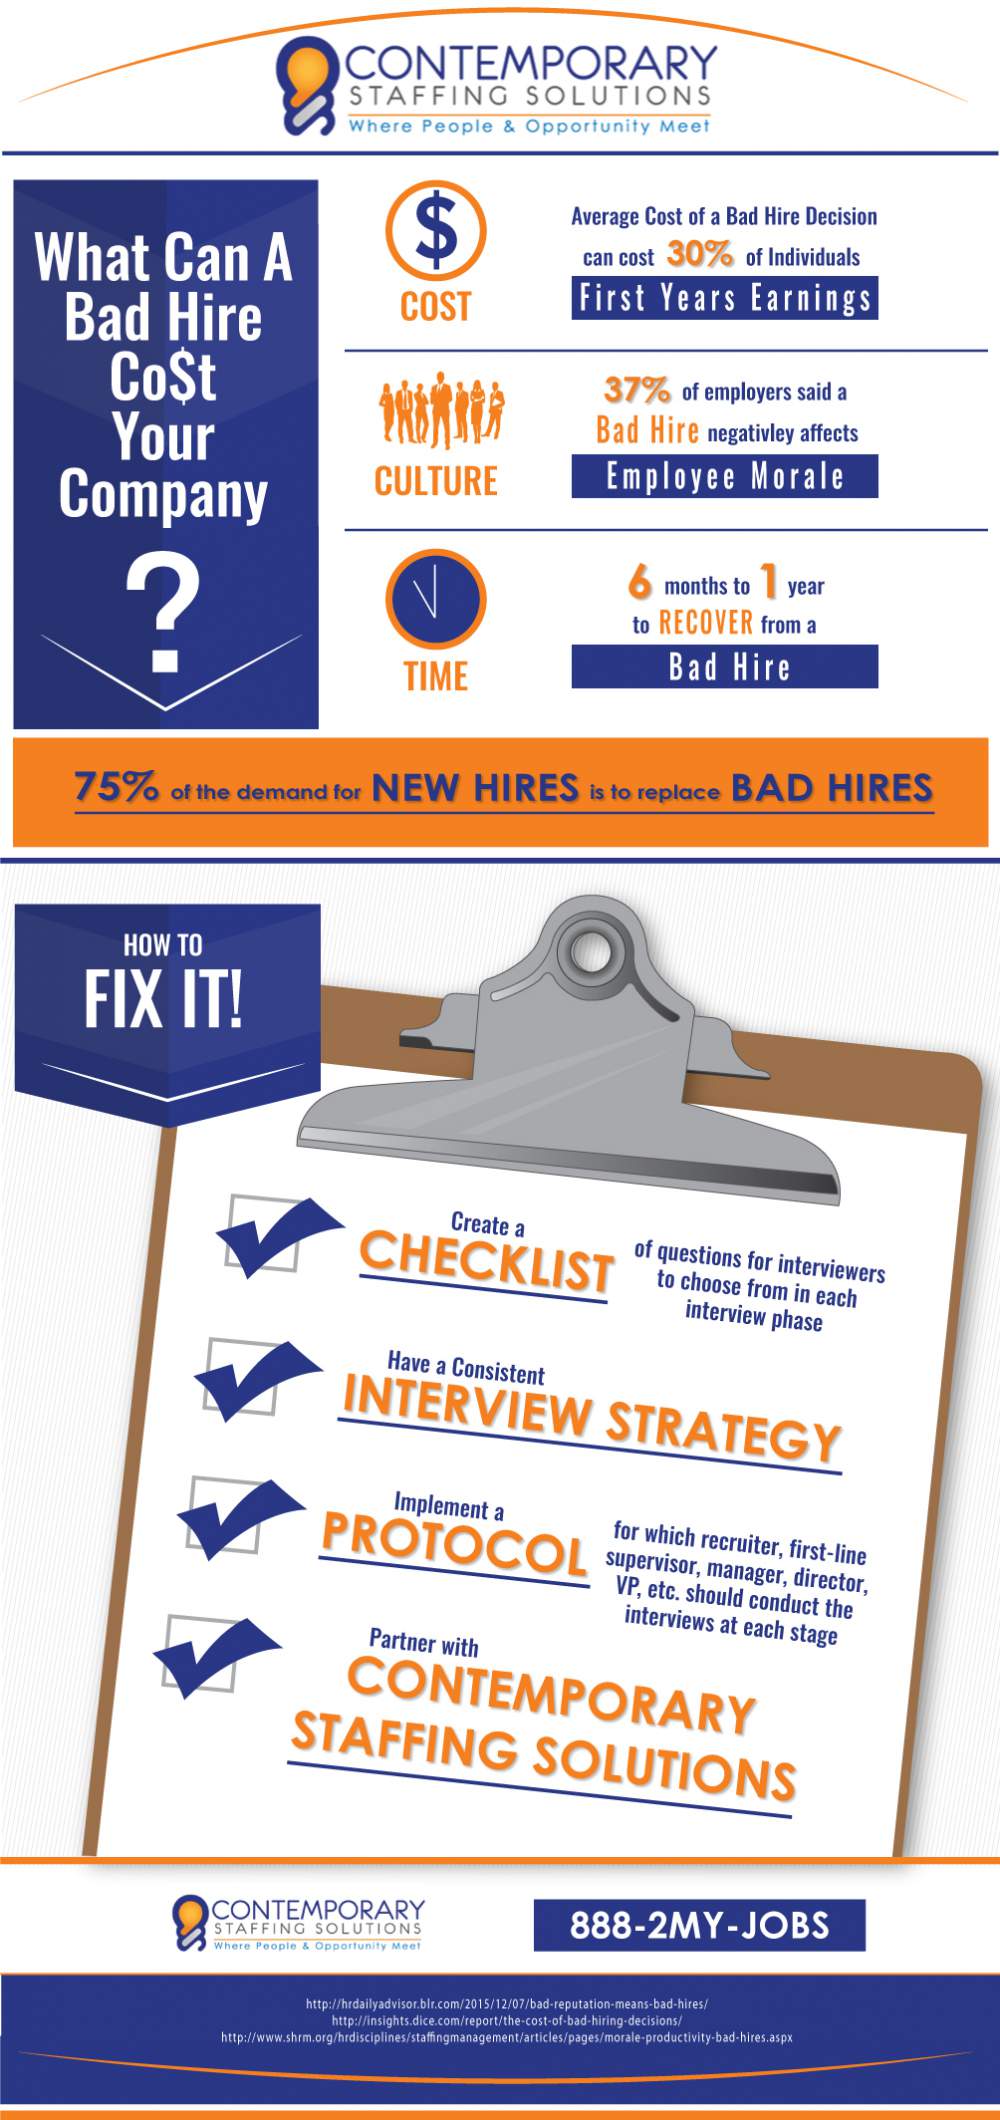 Bad Hire Cost Your Company